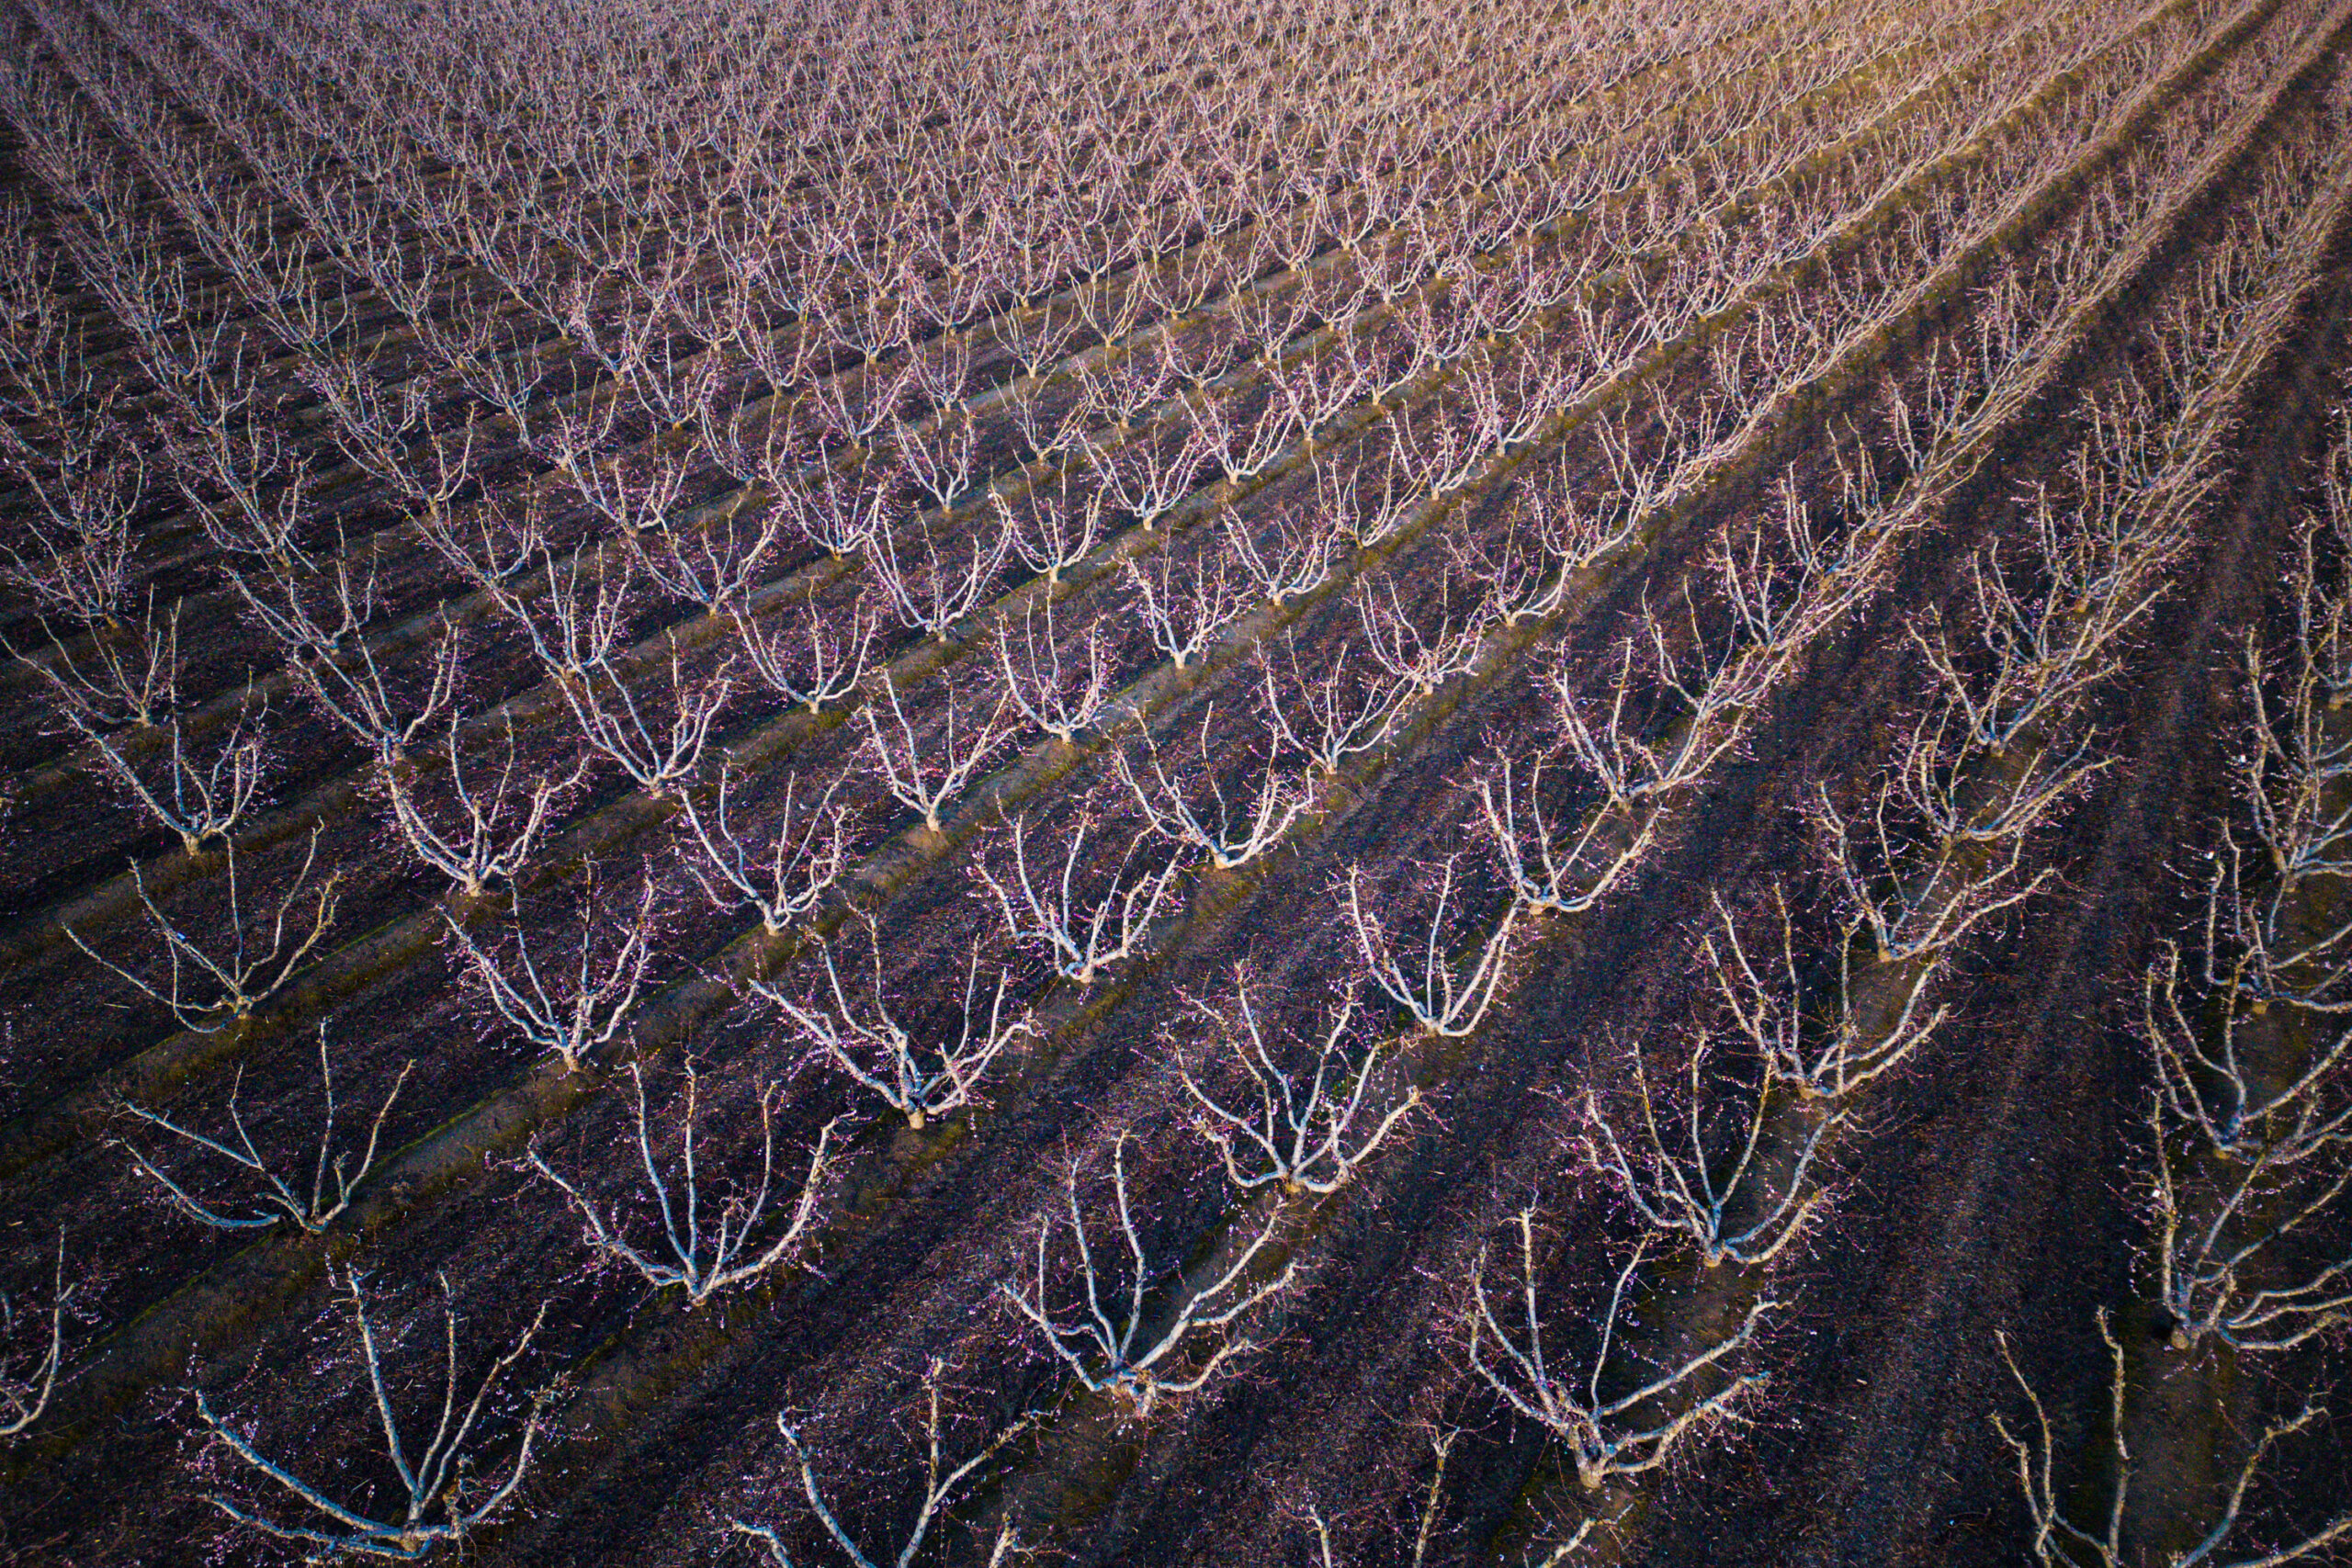 Textures and lines created by an aerial view of young stone fruit trees in bloom